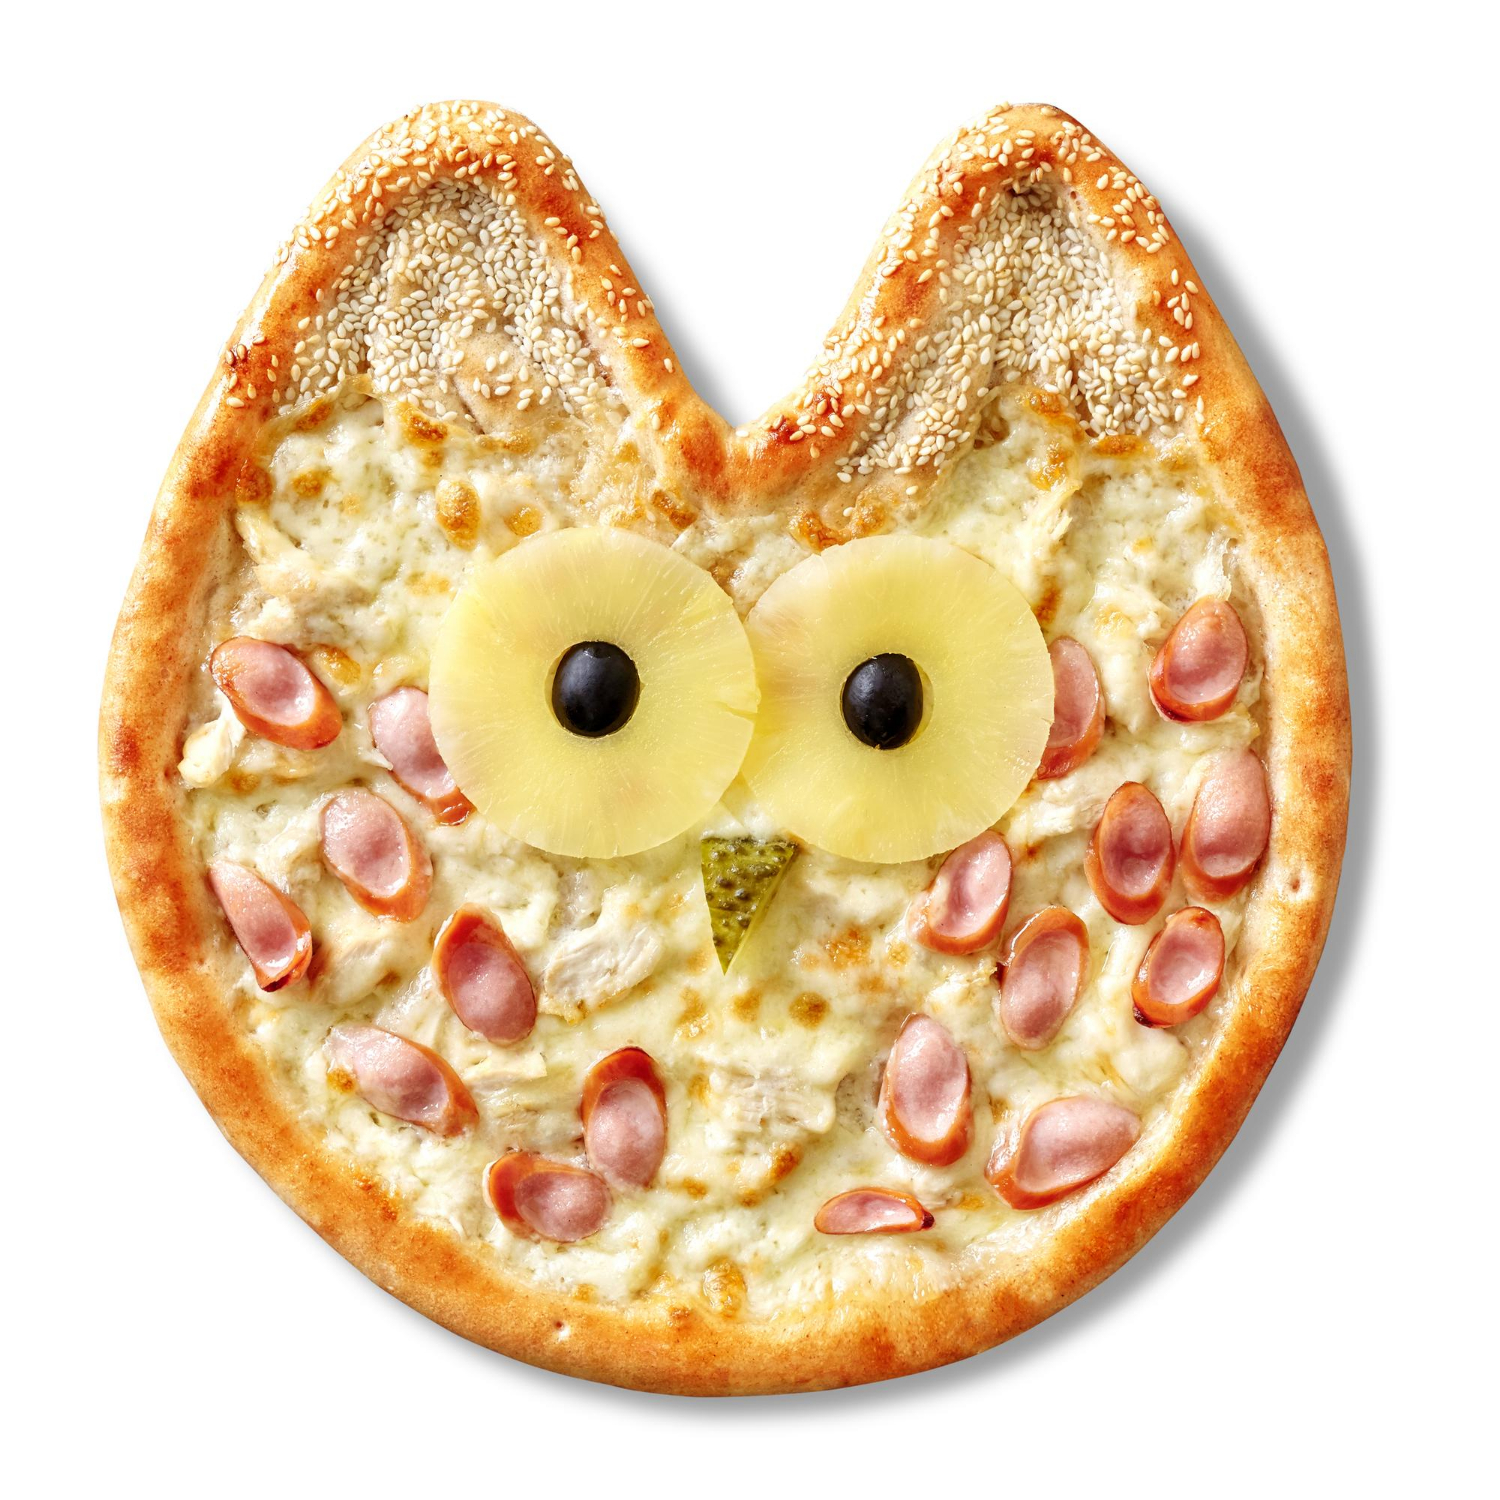 funny-owlshaped-pizza-with-cream-cheese-sauce-chicken-vienna-sausage-pineapple-olives-pickled-cucumber-sesame_1.jpg